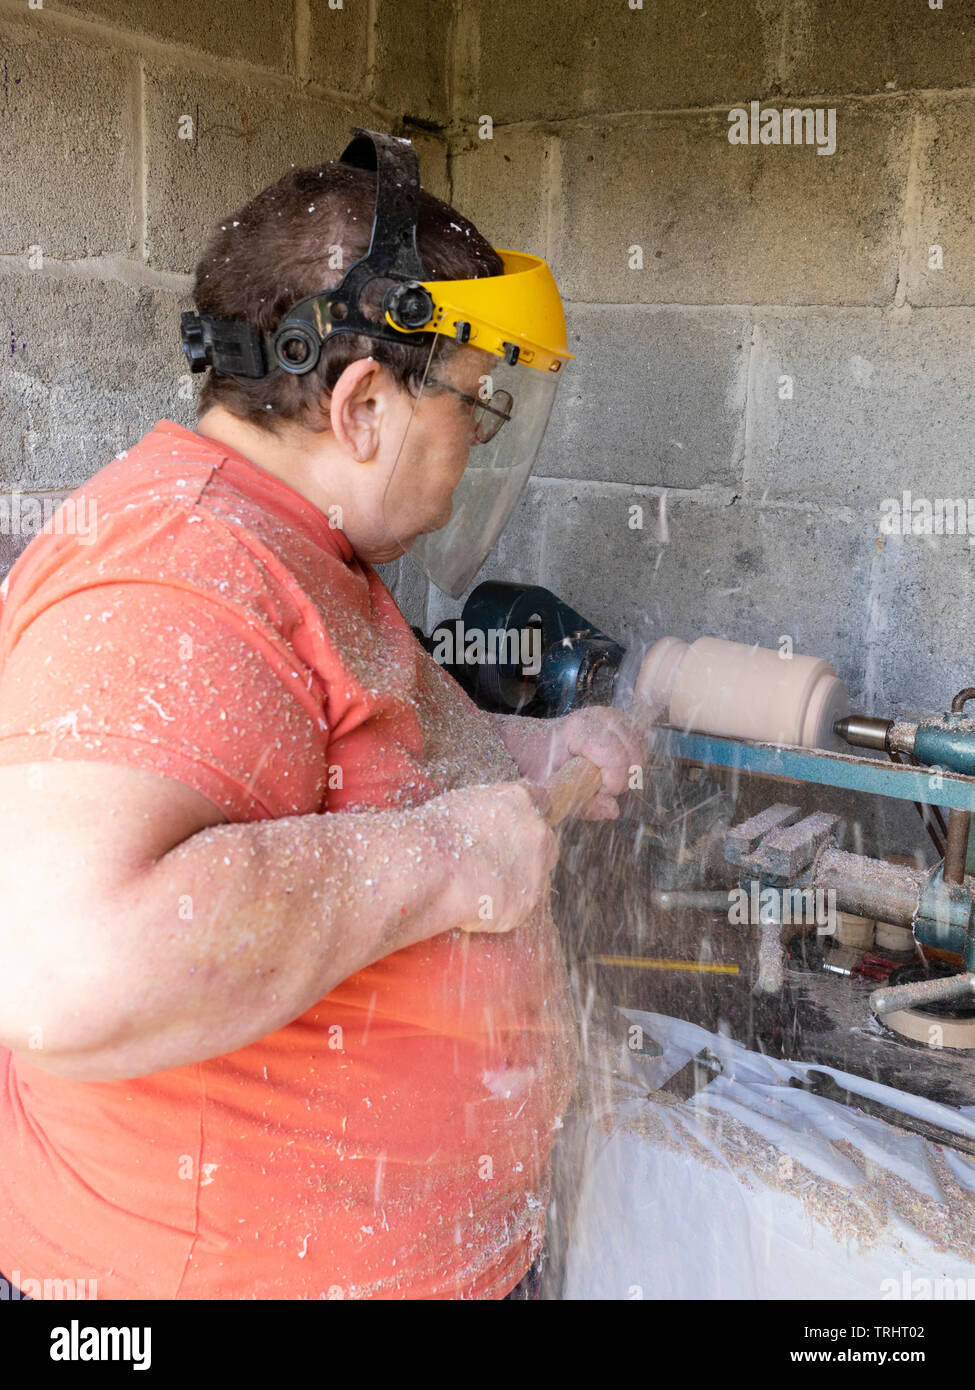 Mature, 65 year old, female crafter turning a wooden vase on her lathe Stock Photo